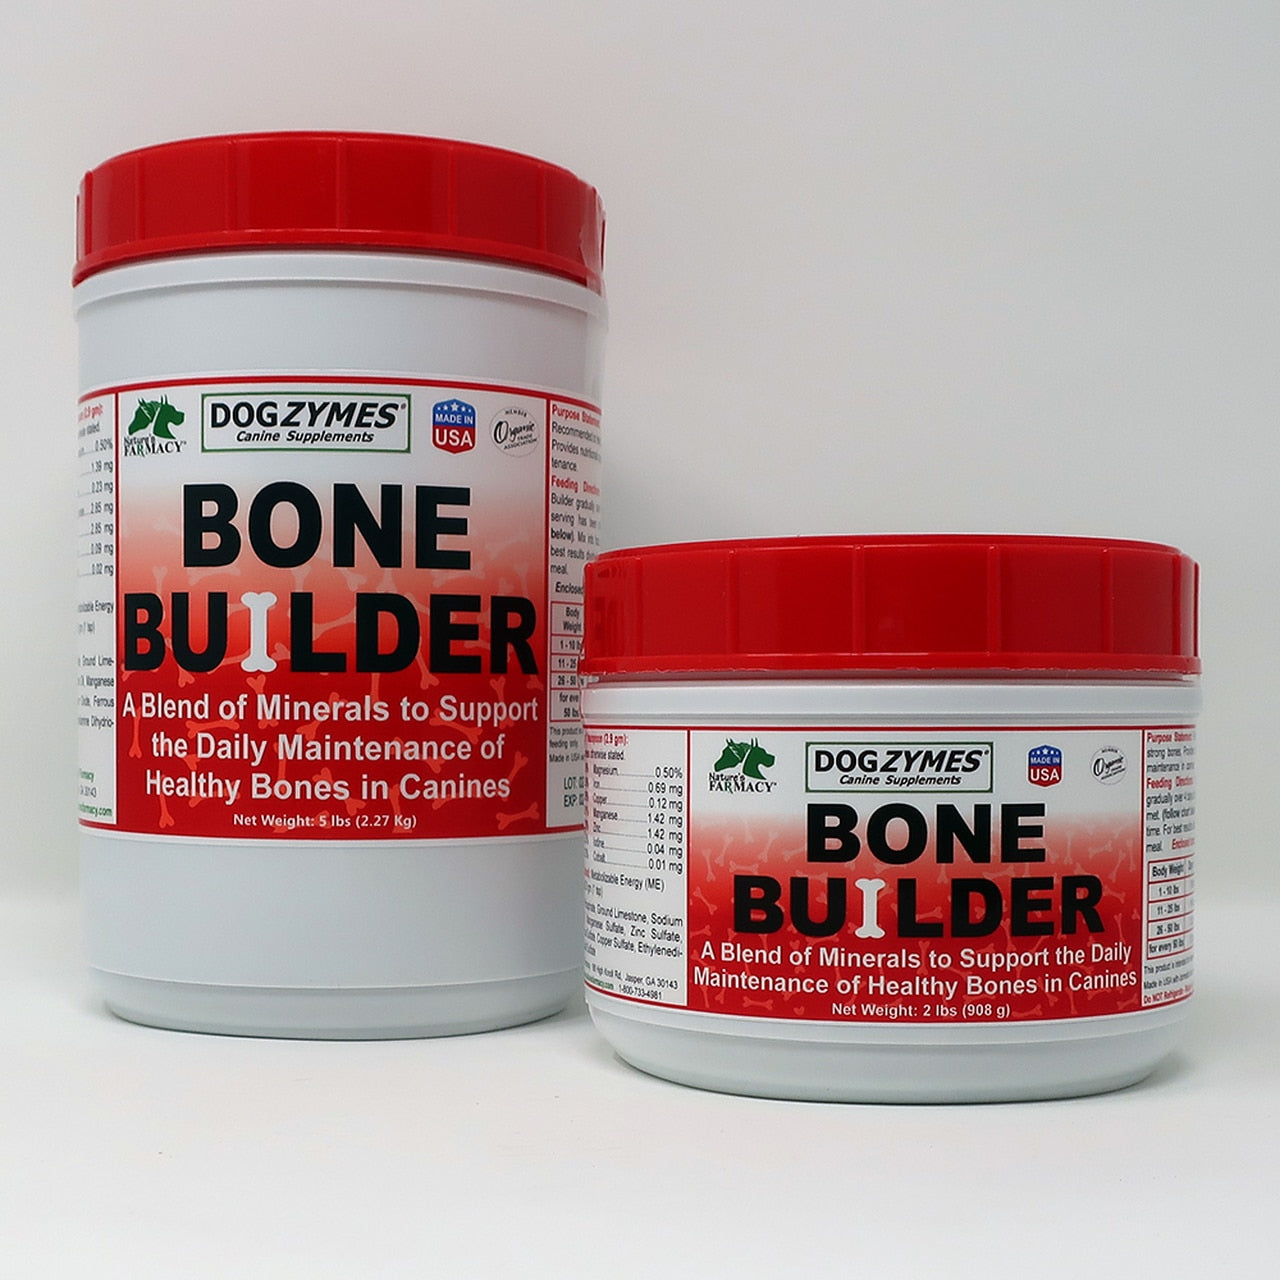 Nature's Farmacy Dogzymes Bone Builder Supplement For Dogs, 2lb